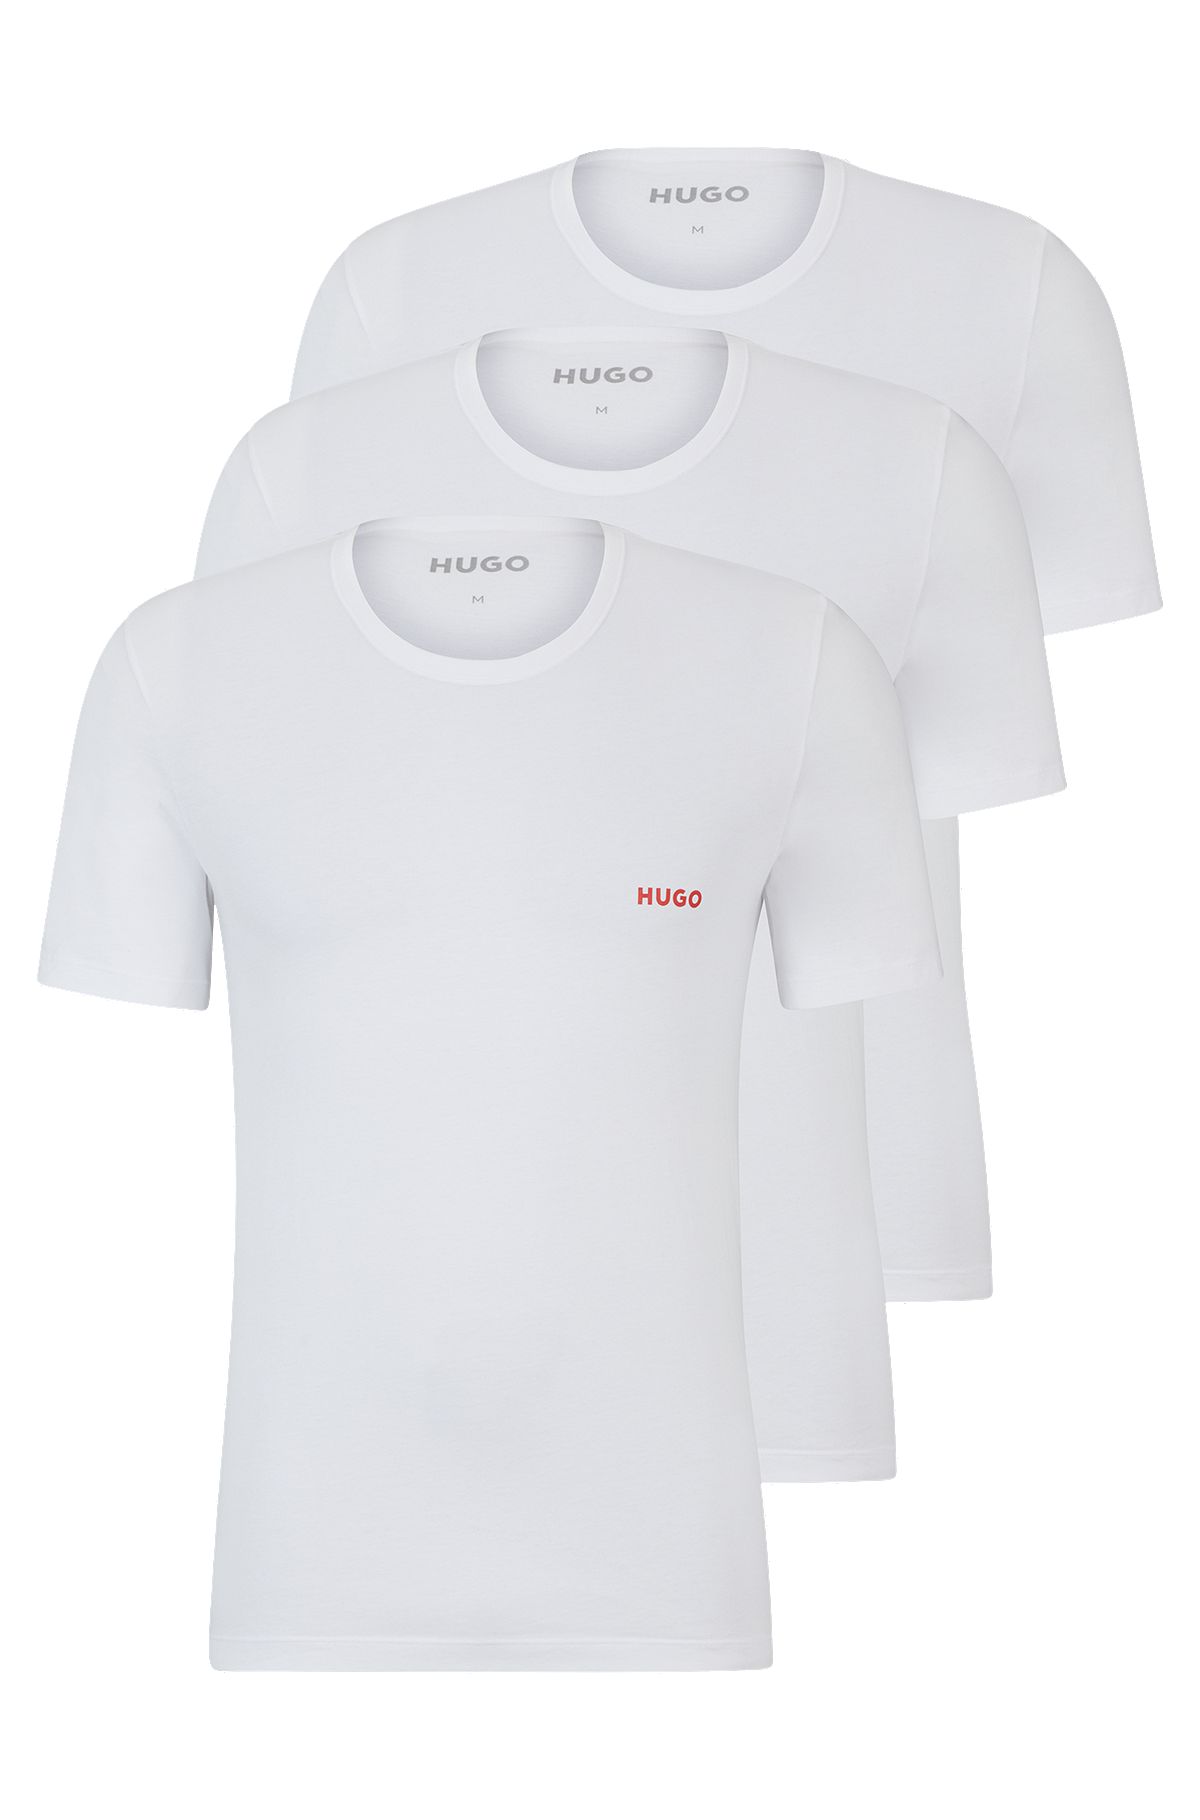 Three-pack of underwear T-shirts in cotton with logos, White